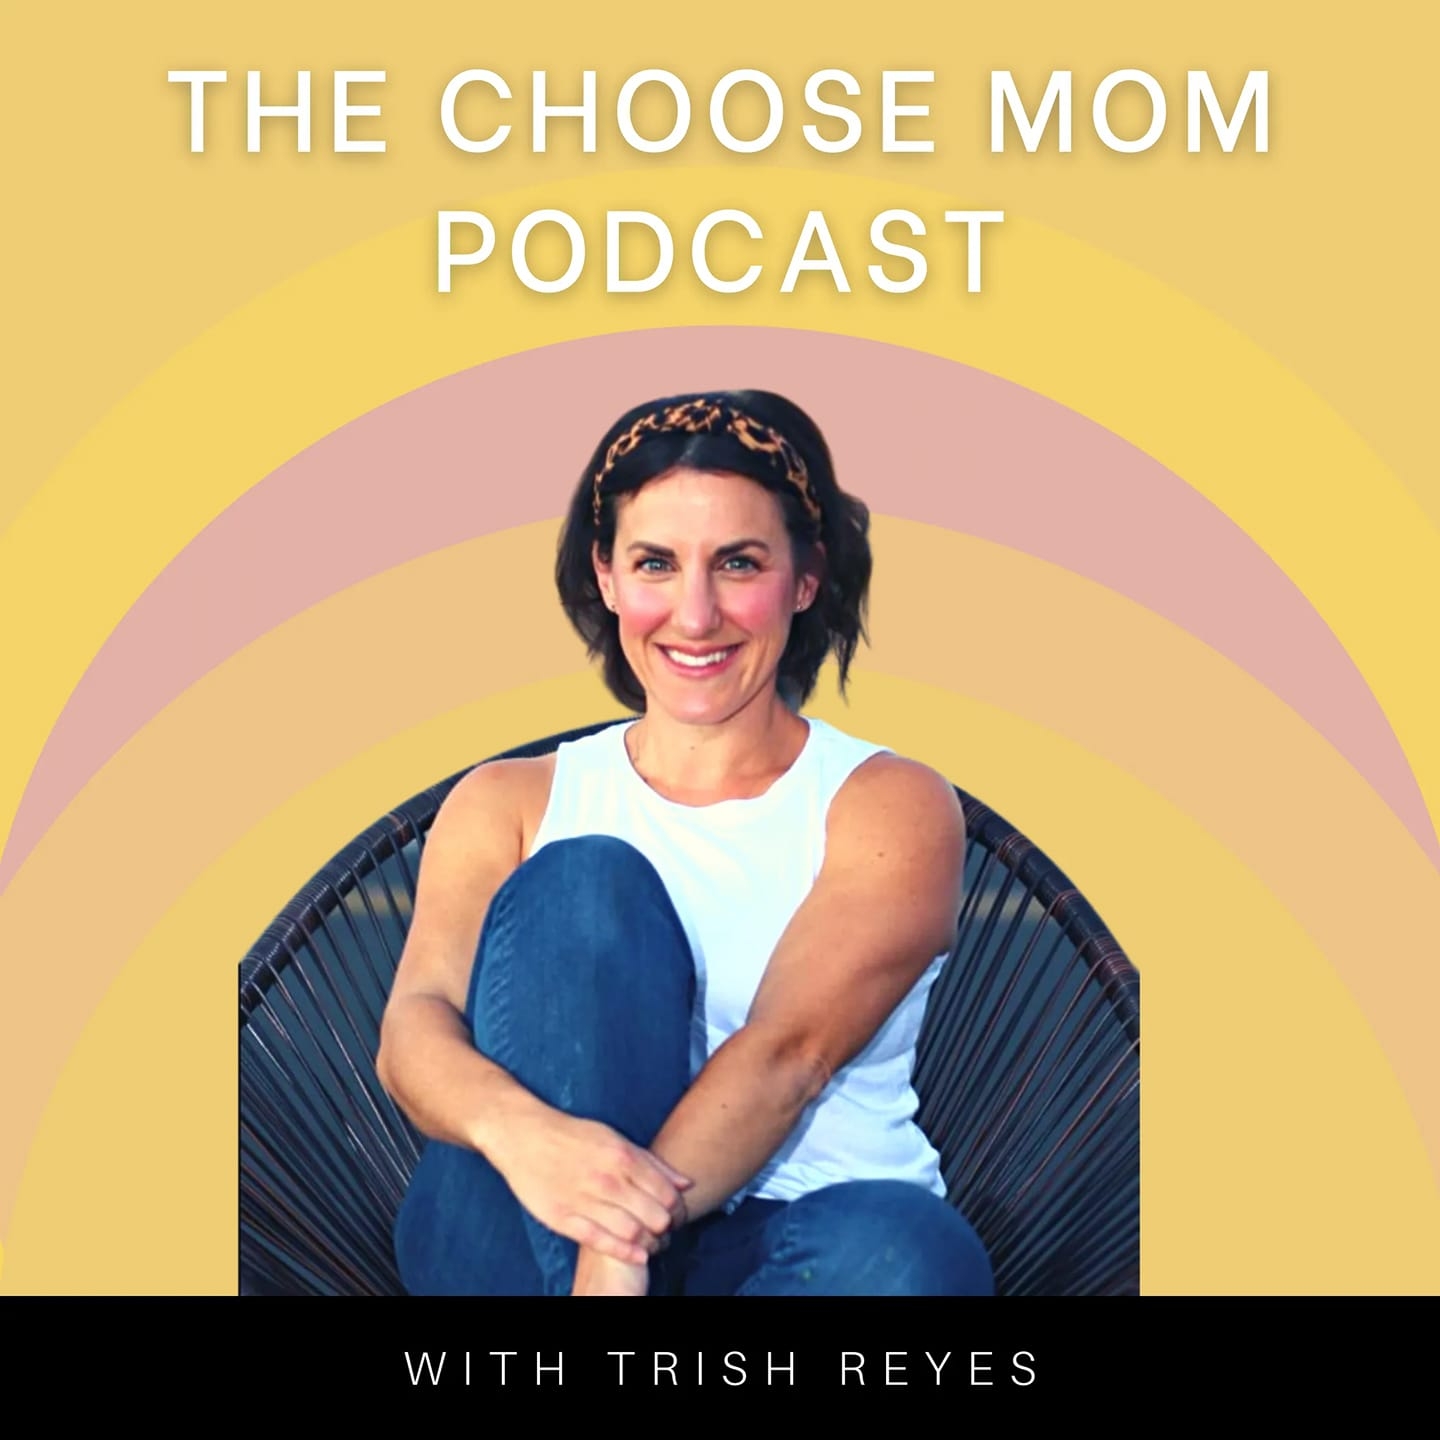 The Choose Mom Podcast with Trish Reyes